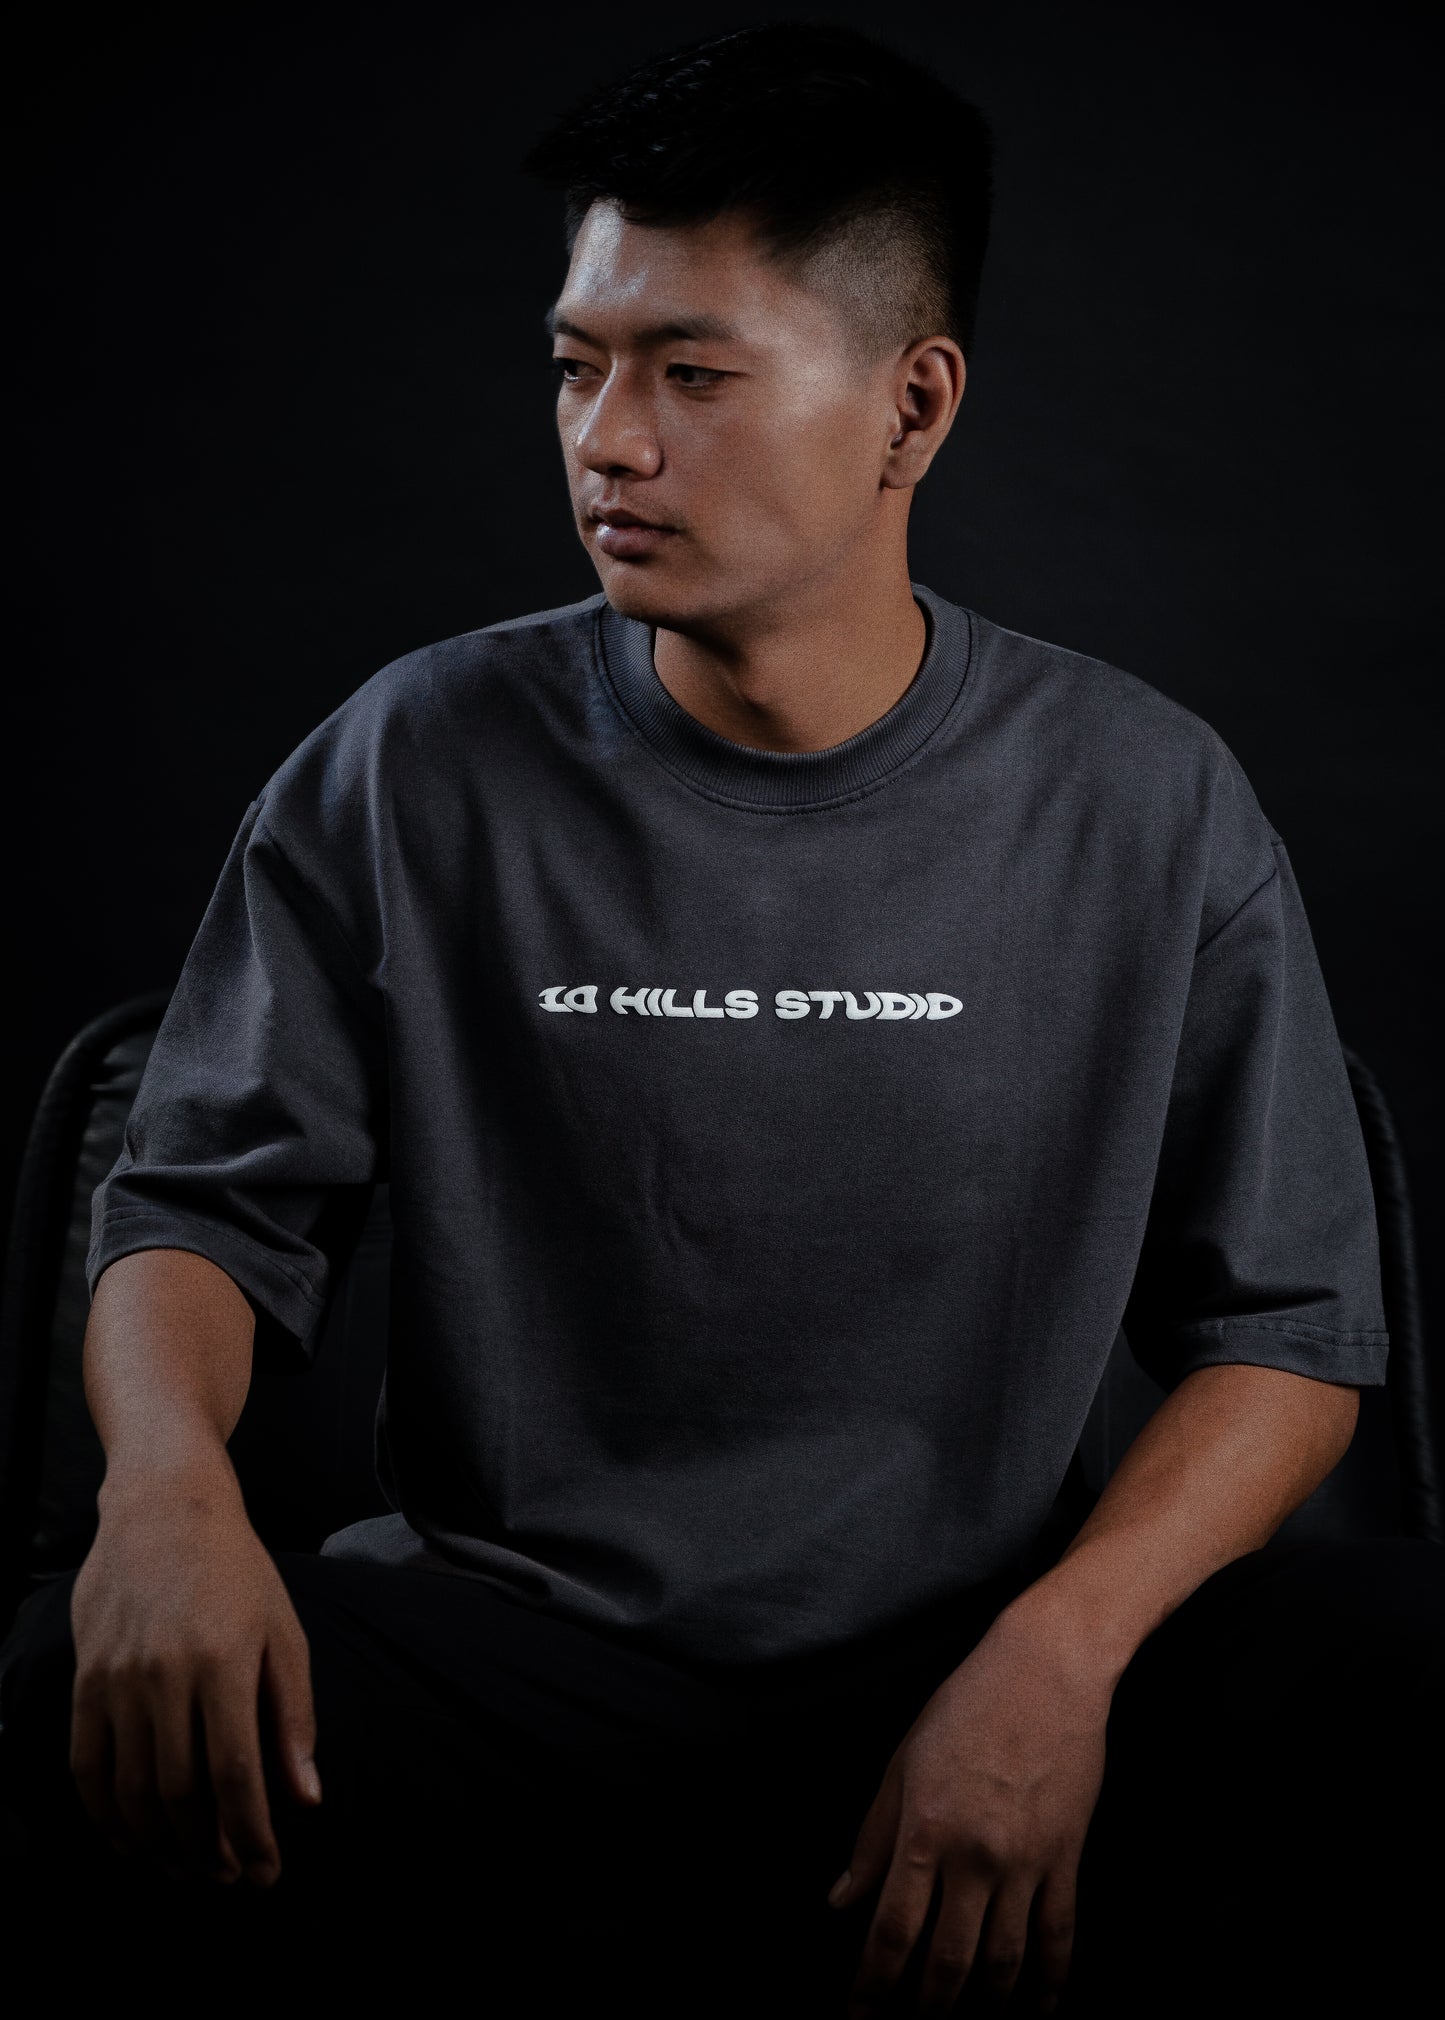 Front view of Model sitting while wearing the 10 Hills Studio Vintage Black Logo Tee